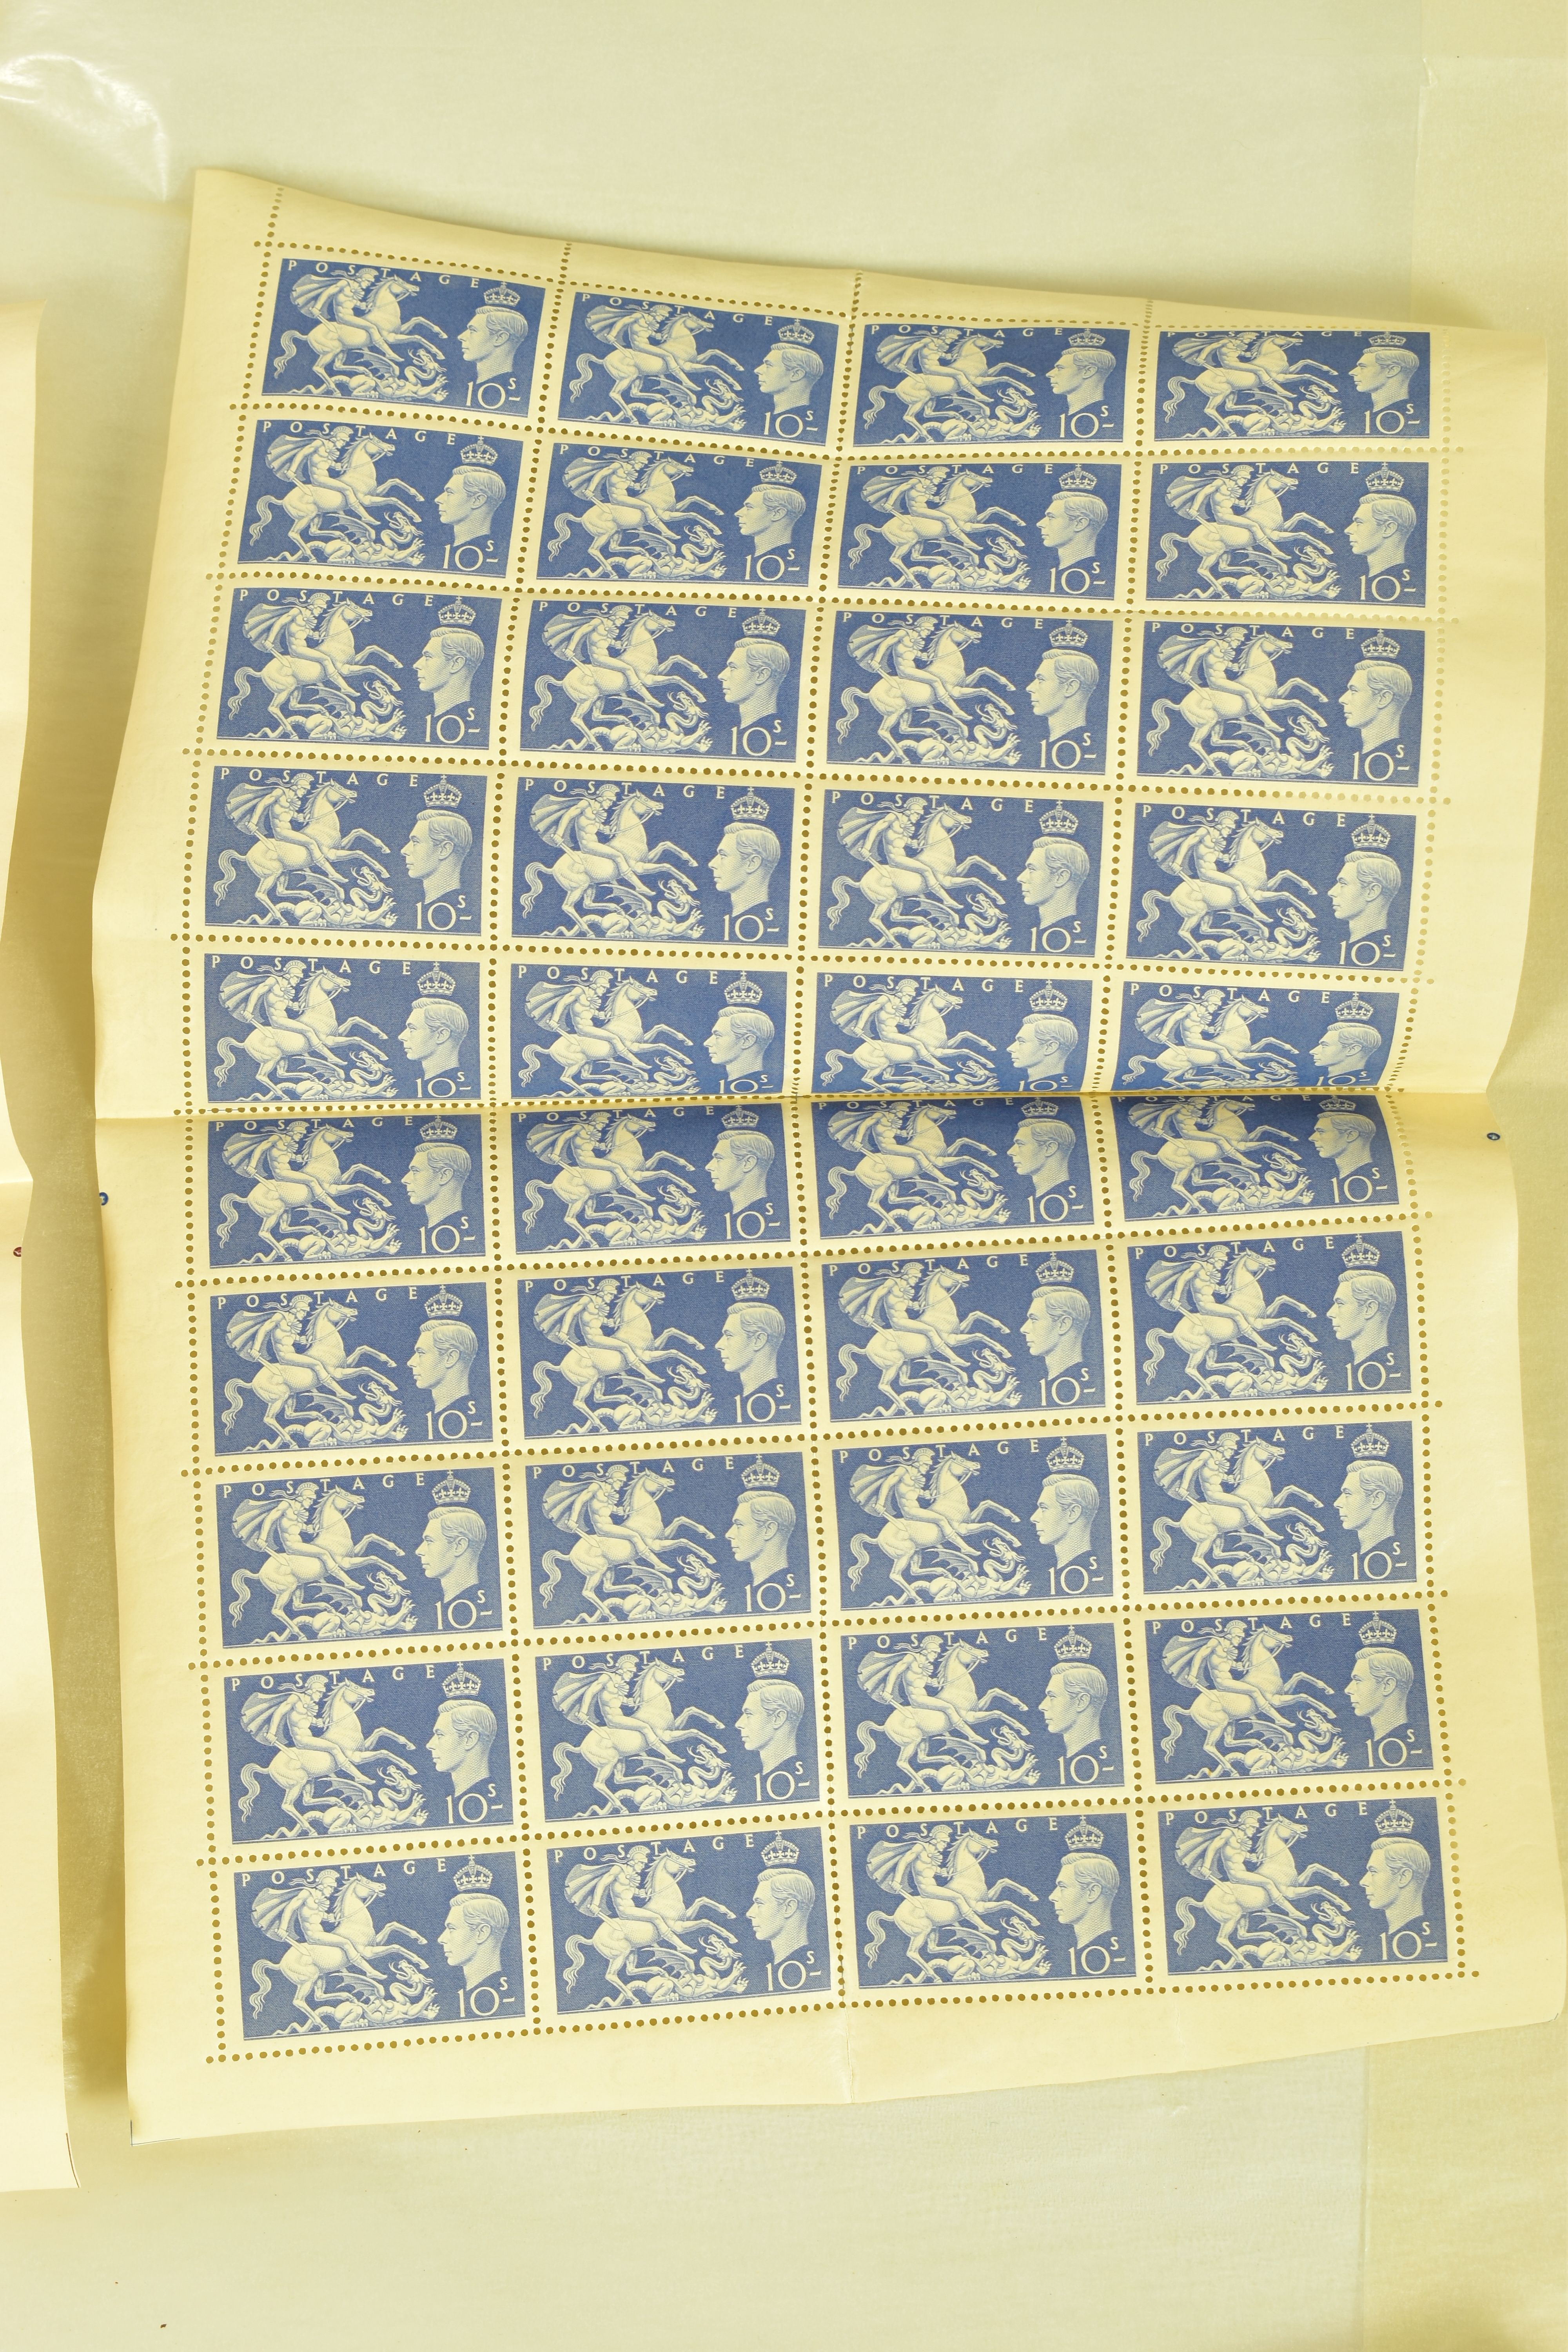 GB KGVI 1951 festival high values 2/6, 10s and £1 all in complete Sheets. rare thus. - Image 4 of 4